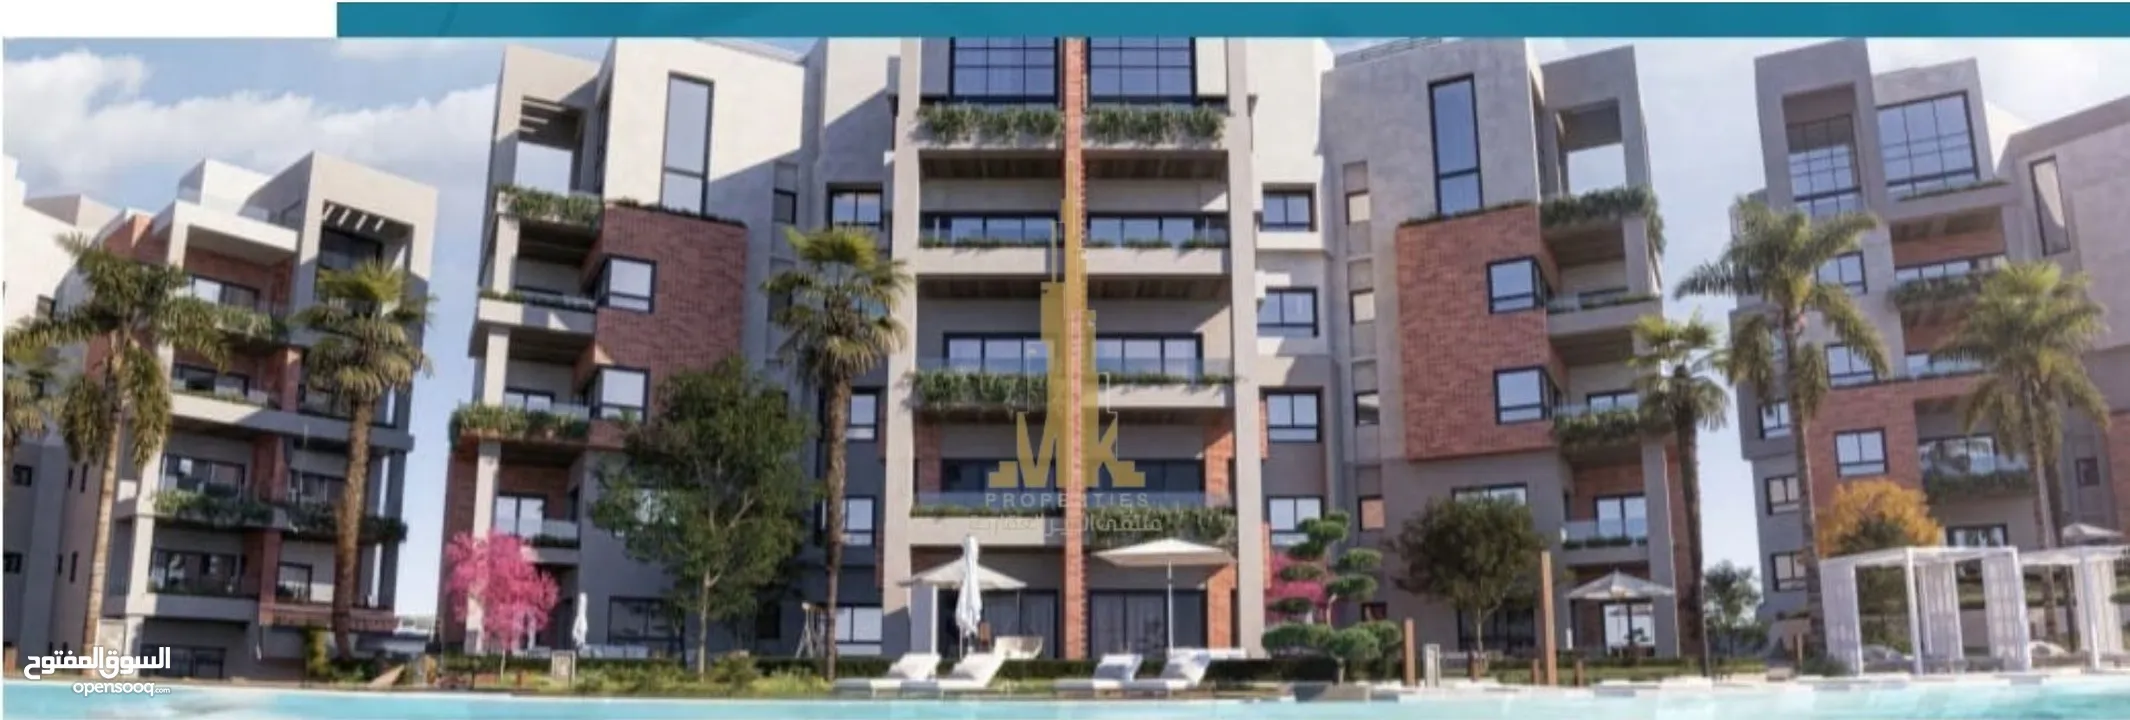 Apartment For Sale/ Installments For Three Years/ Freehold